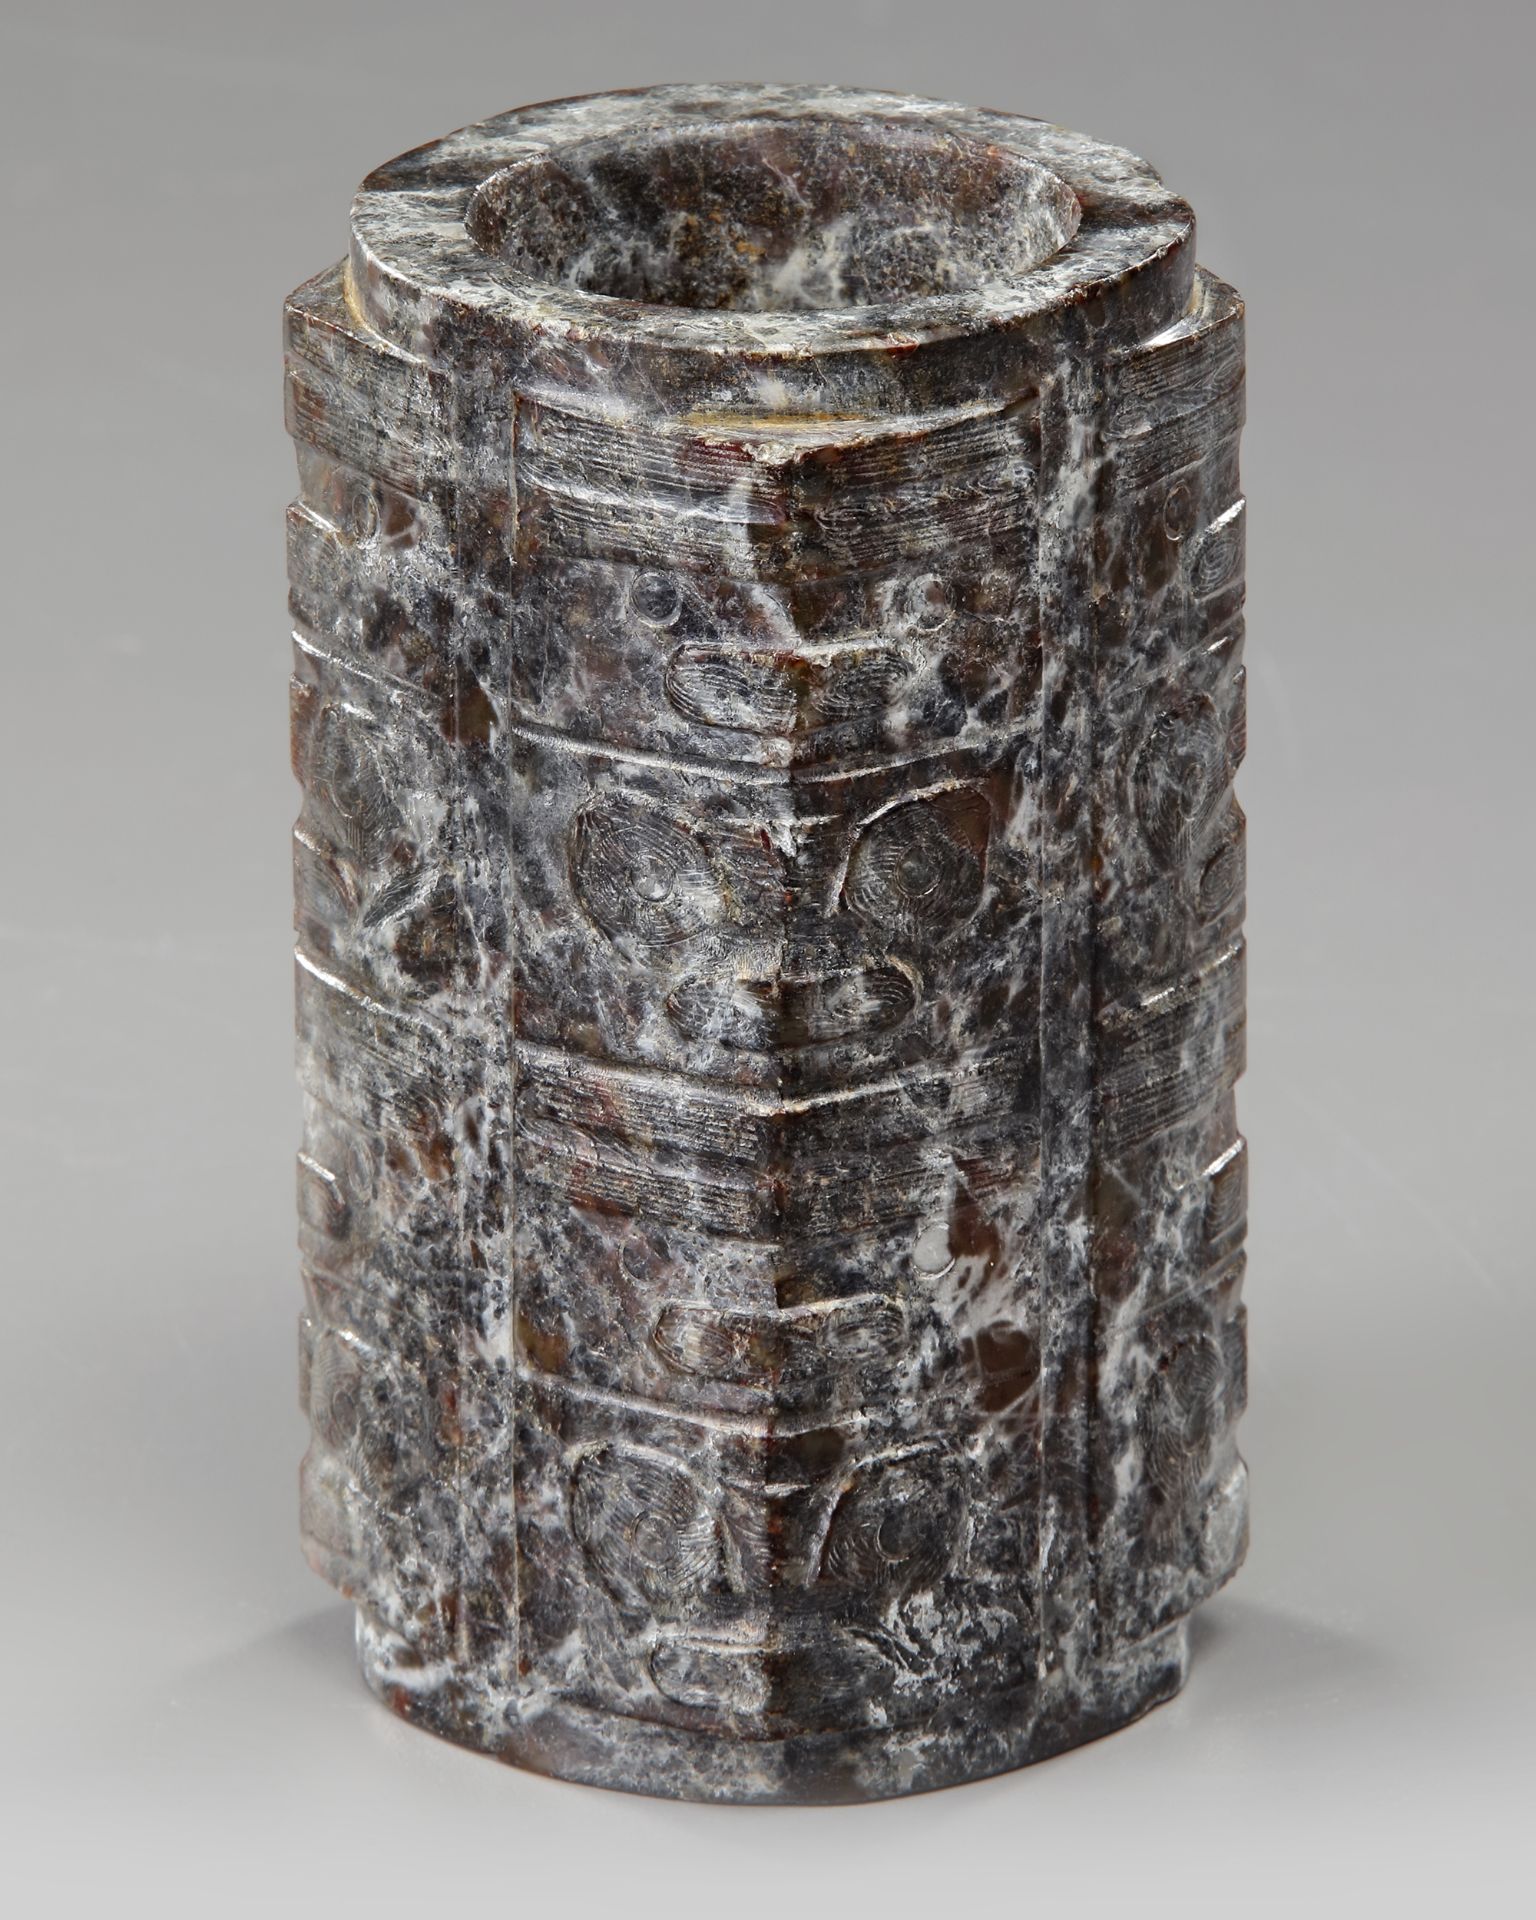 A RARE BLACK JADE RITUAL VESSEL, CONG, SONG DYNASTY (960-1279) - Image 2 of 3